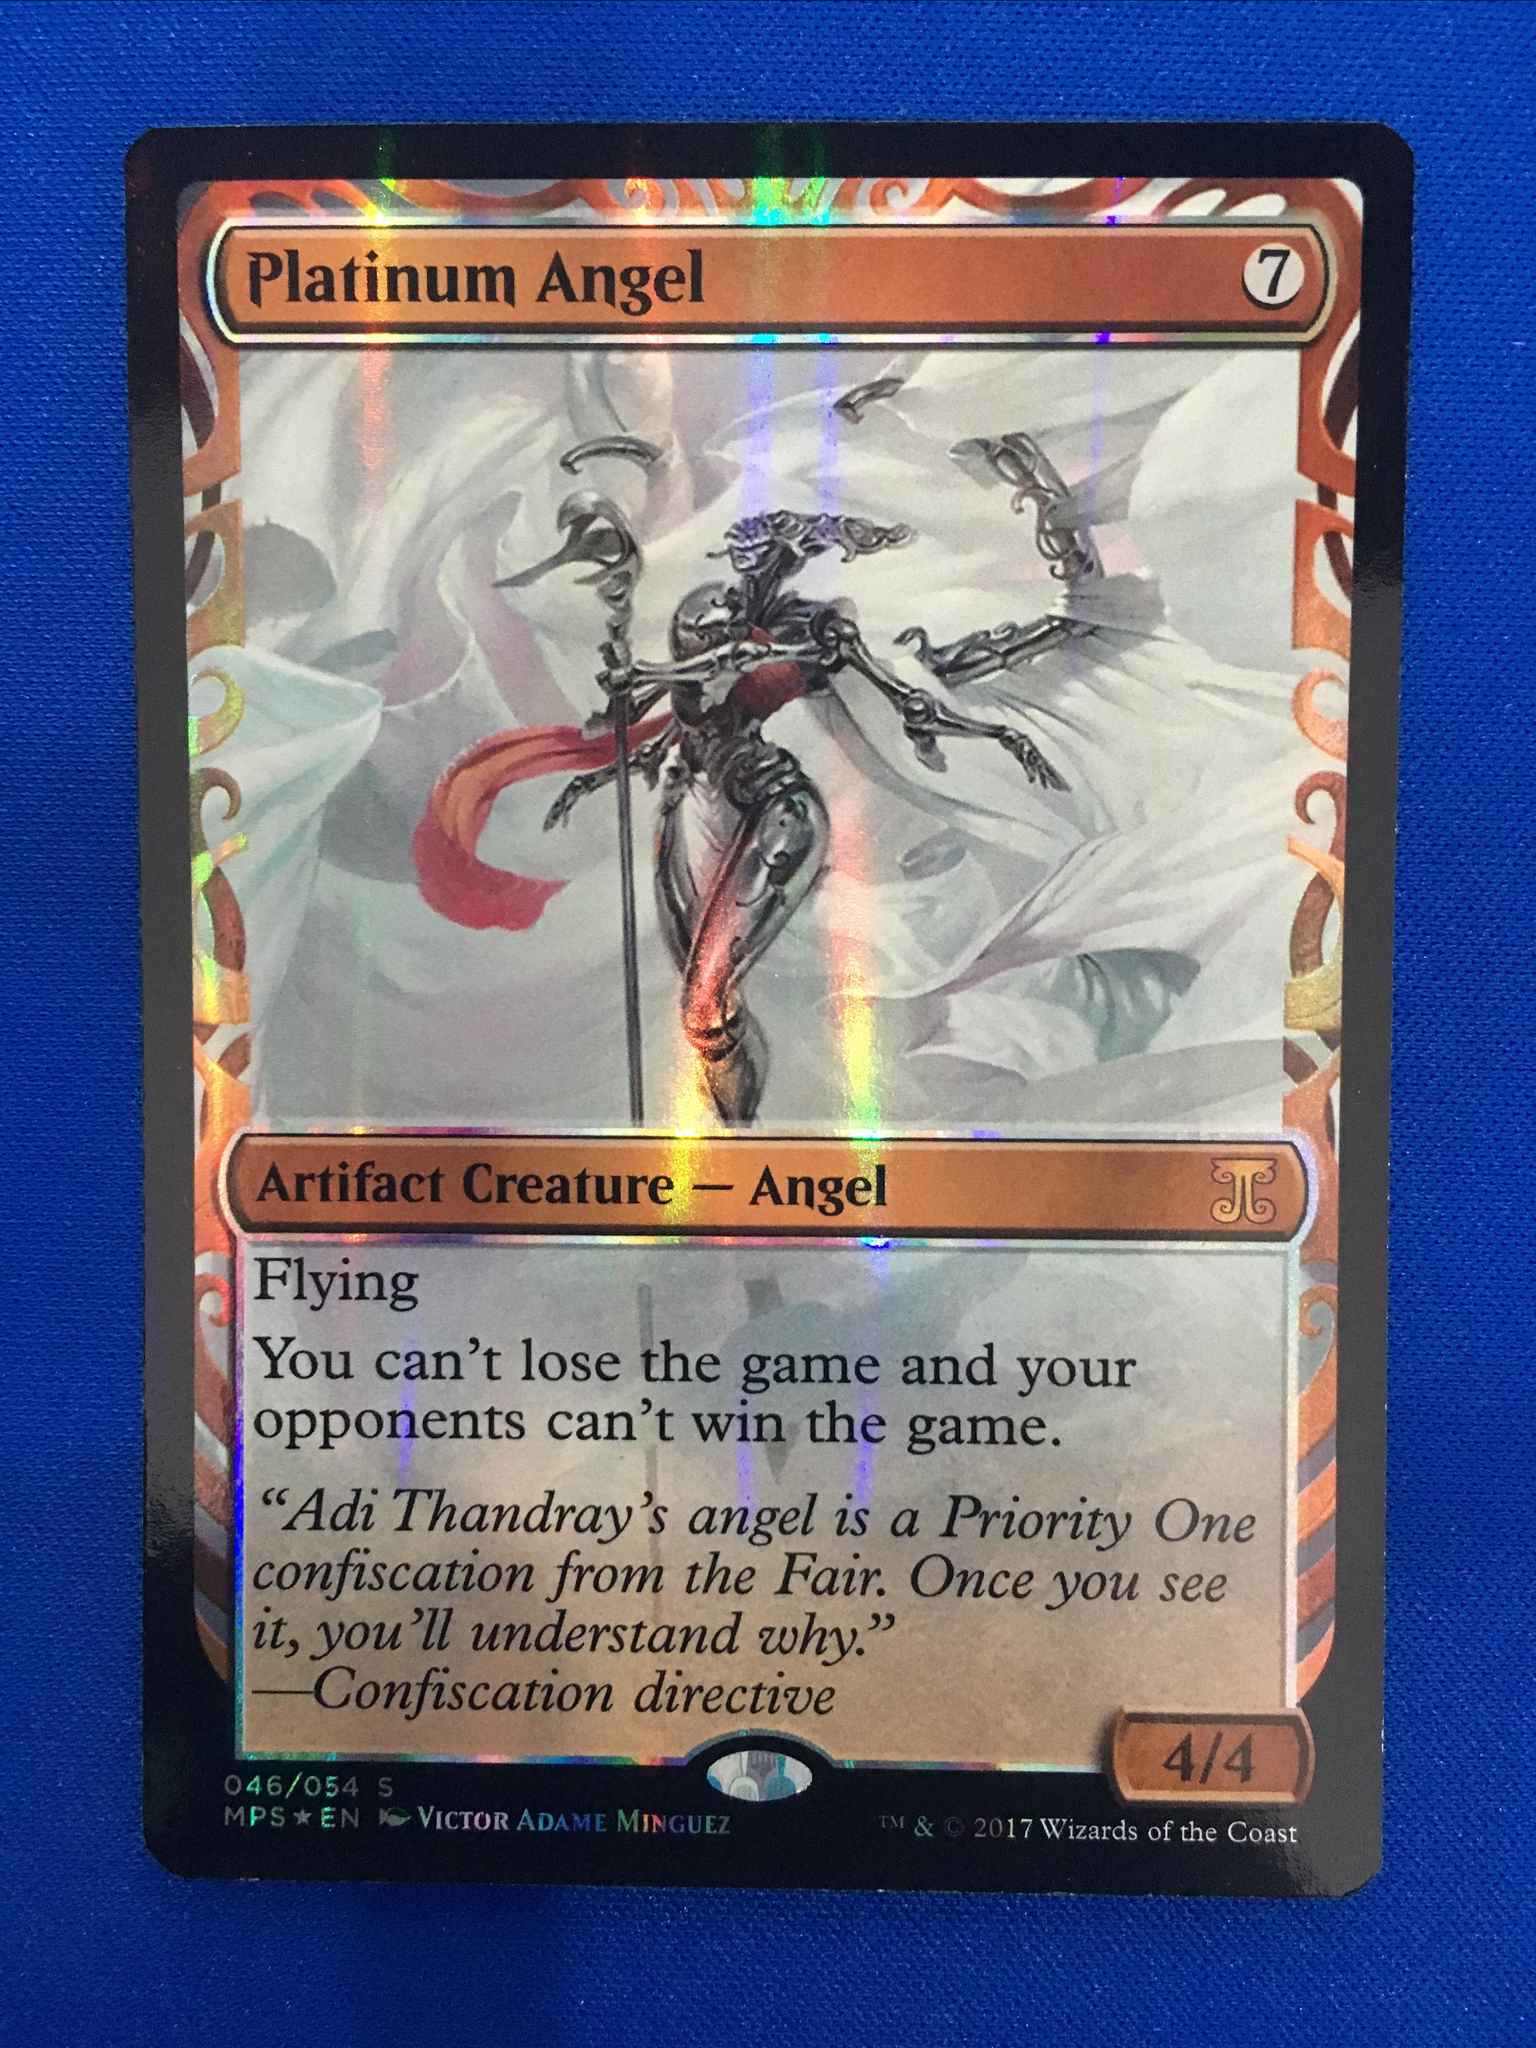 Platinum Angel Master Piece Platinum Angel Masterpiece Series Kaladesh Inventions Magic The Gathering Online Gaming Store For Cards Miniatures Singles Packs Booster Boxes